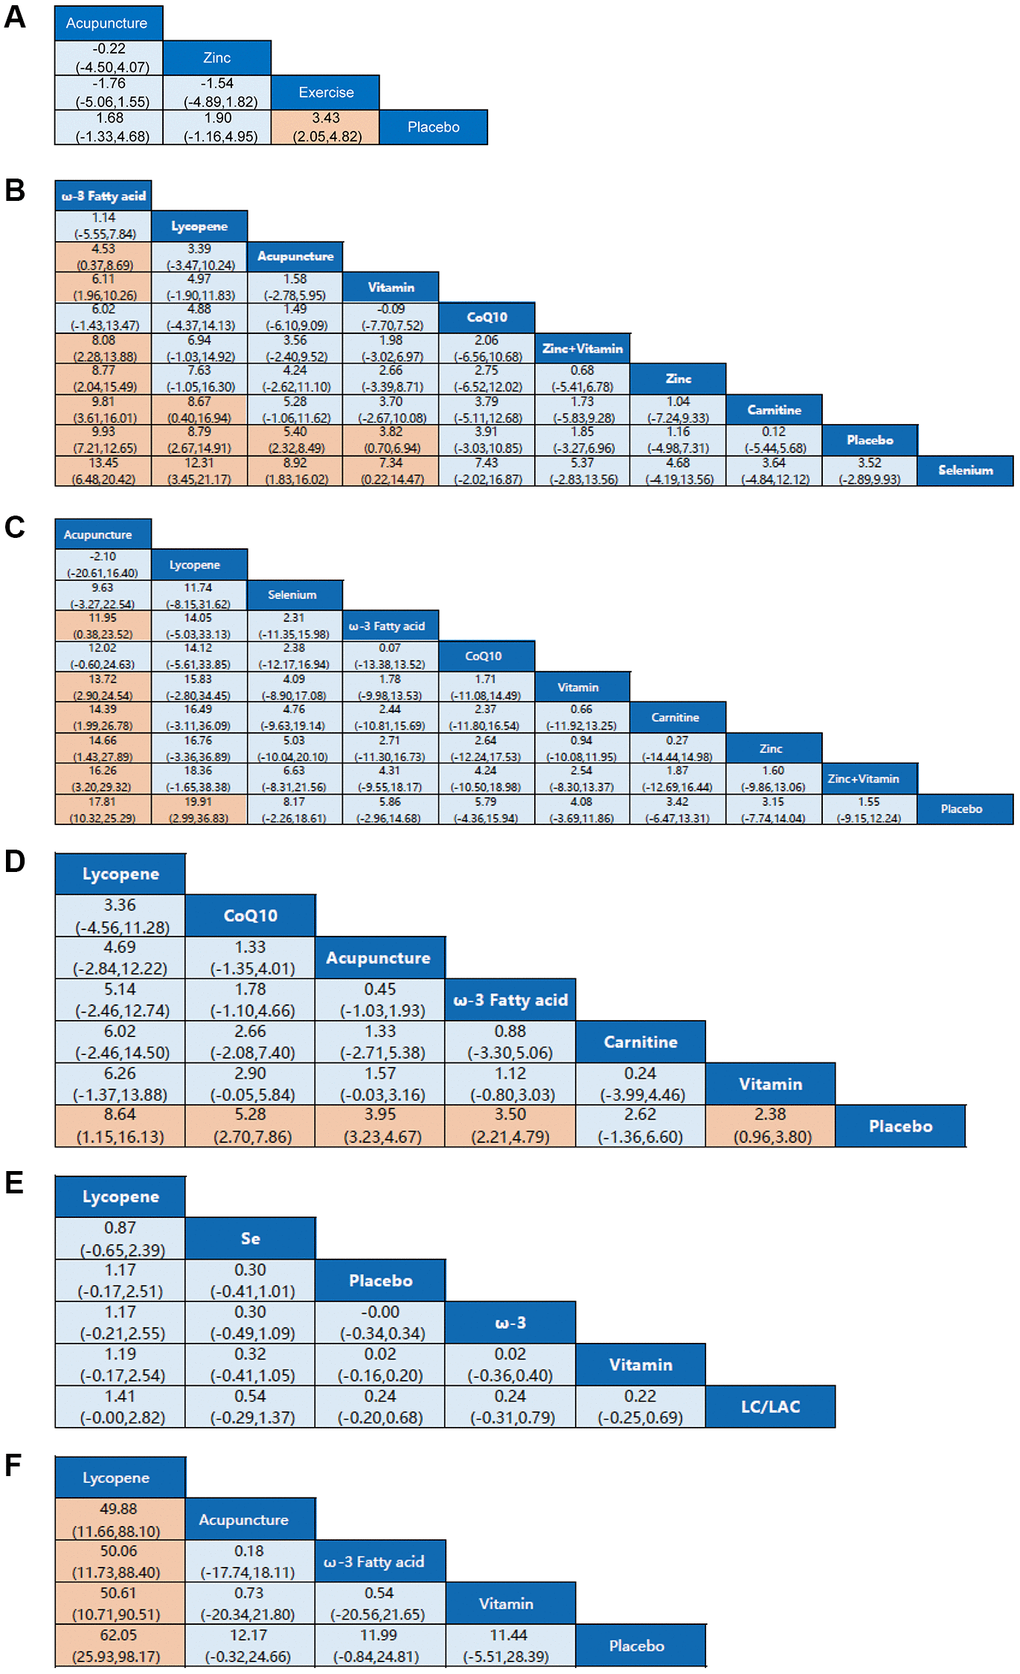 Network meta-analysis estimates for efficacy of non-pharmaceutical interventions on sperm parameters. (A) Pregnancy rate. (B) Sperm concentration. (C) Sperm total motility. (D) Sperm forward motility. (E) Sperm quality. (F) Sperm count. Non-pharmaceutical interventions are listed in order of efficacy ranking according to SUCRAs. Comparisons should be read from left to right. Statistically significant differences are shown in orange.